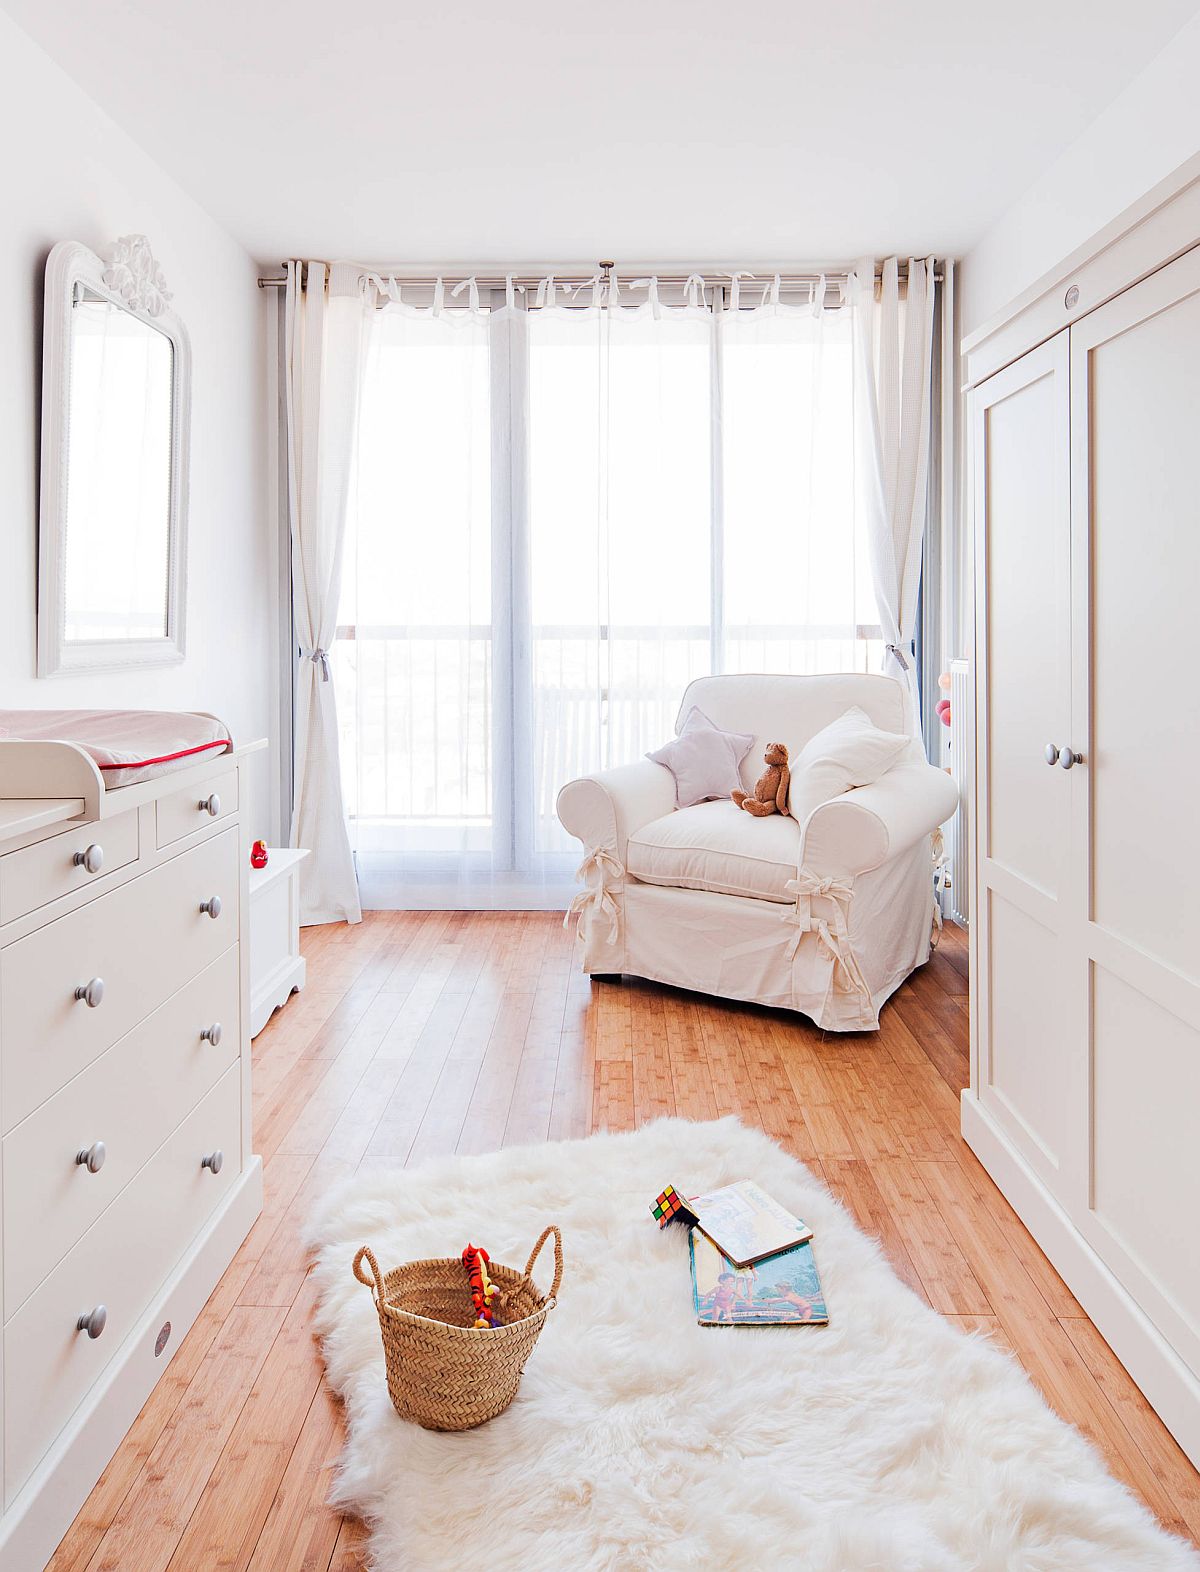 Dash of Parisian charm finds its way into this wood and white farmhouse style nursery